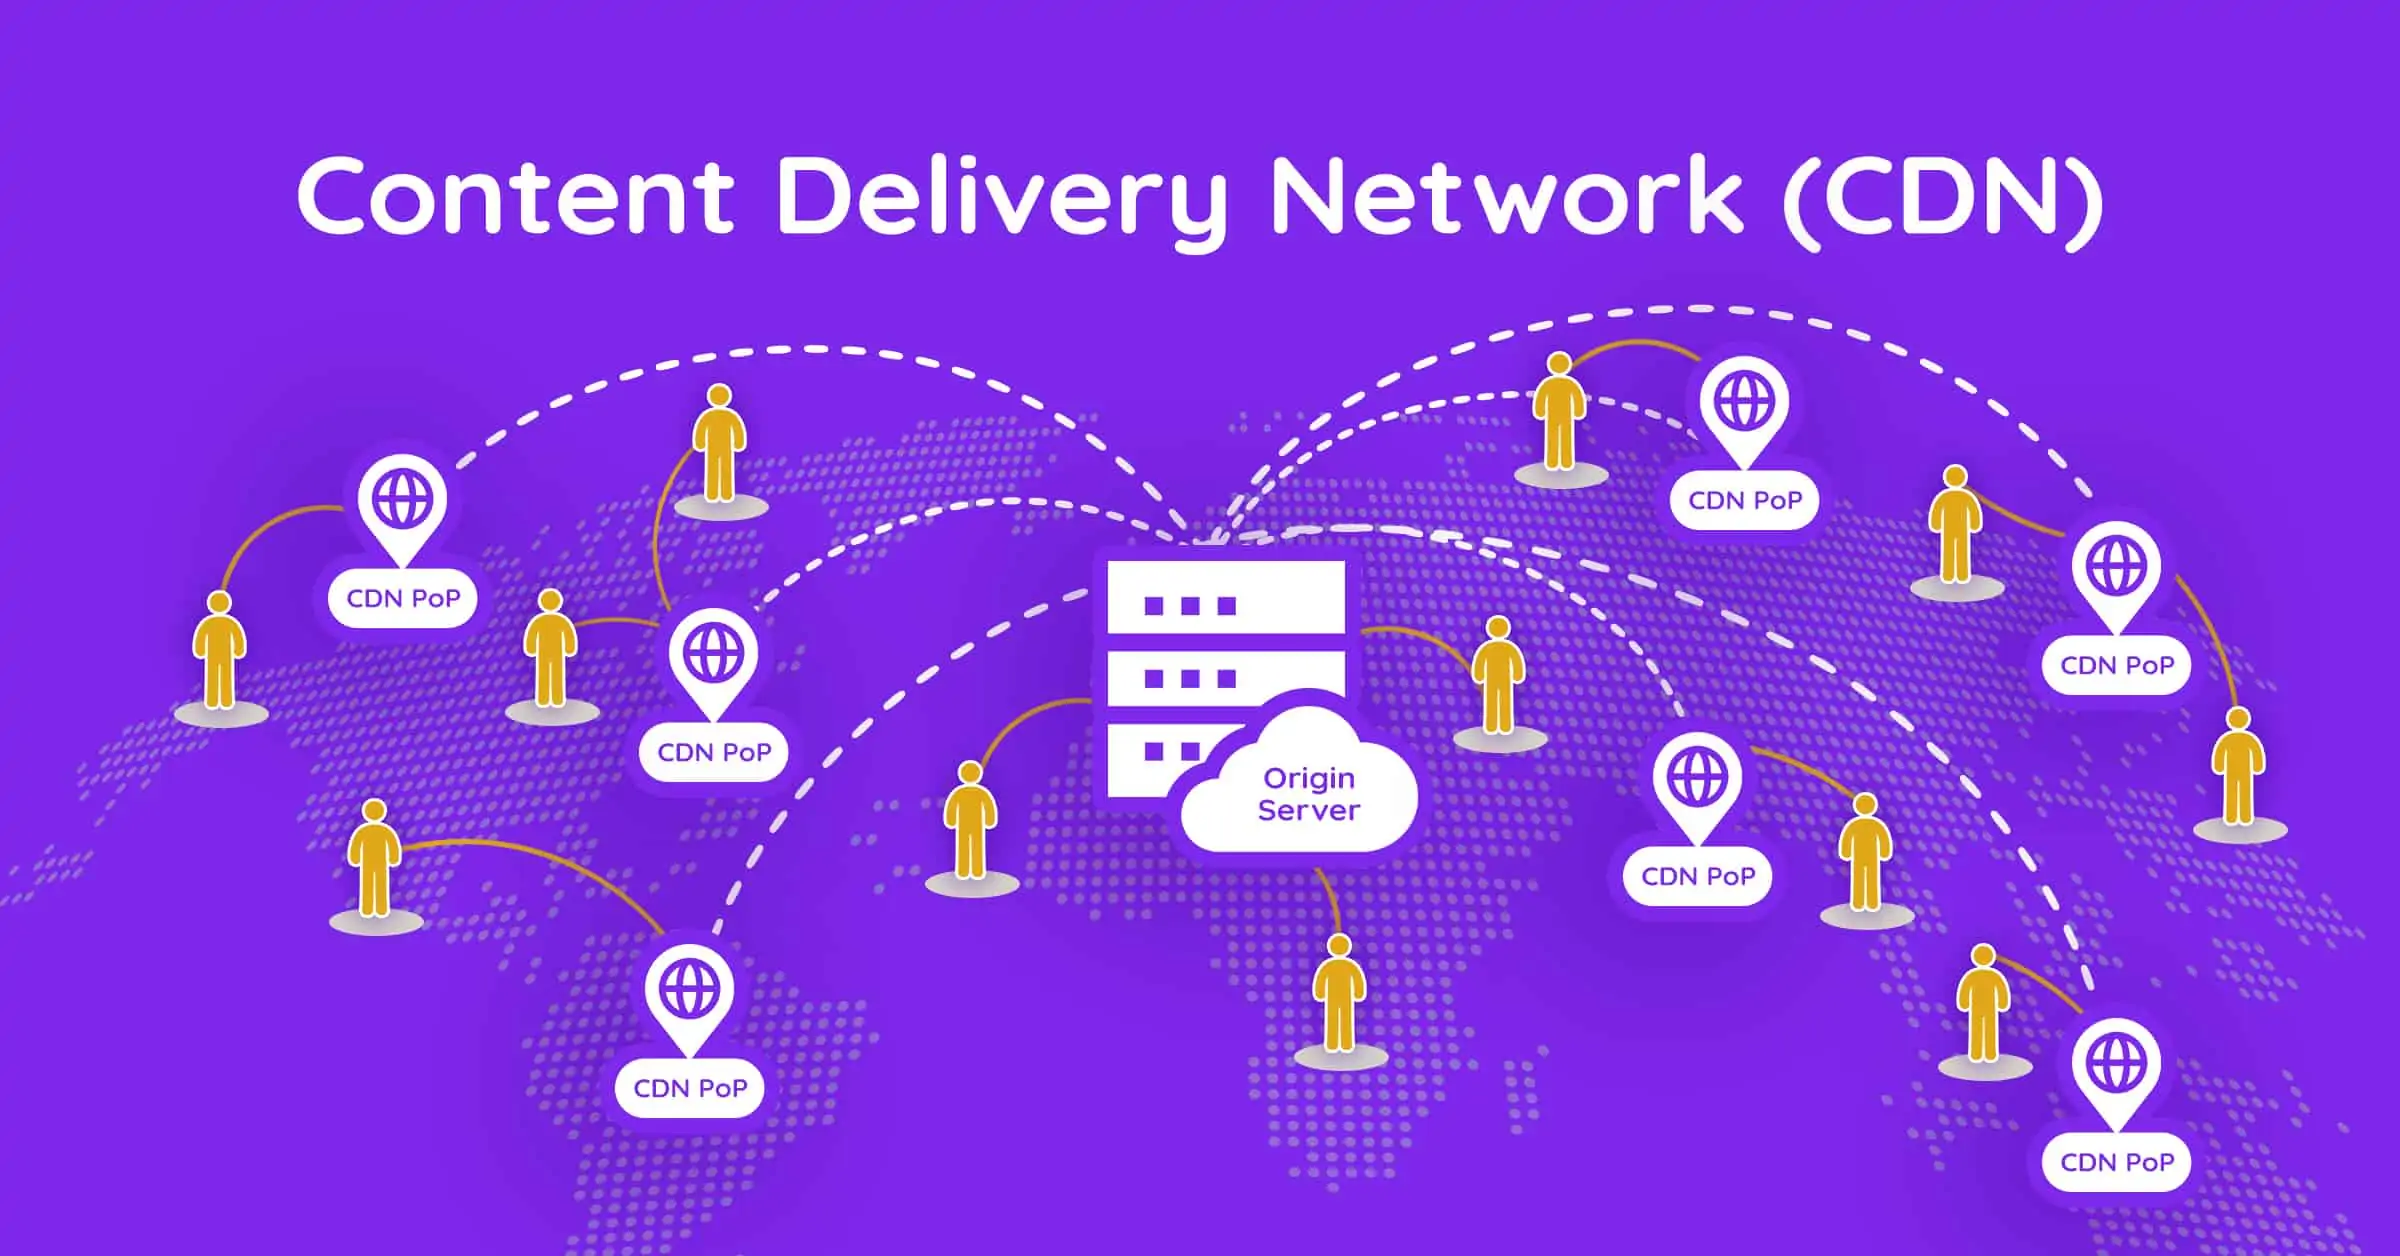 This is the featured image of our blog post on Content Delivery Networks. It shows number of CDN servers spread across the world and connected to the main server